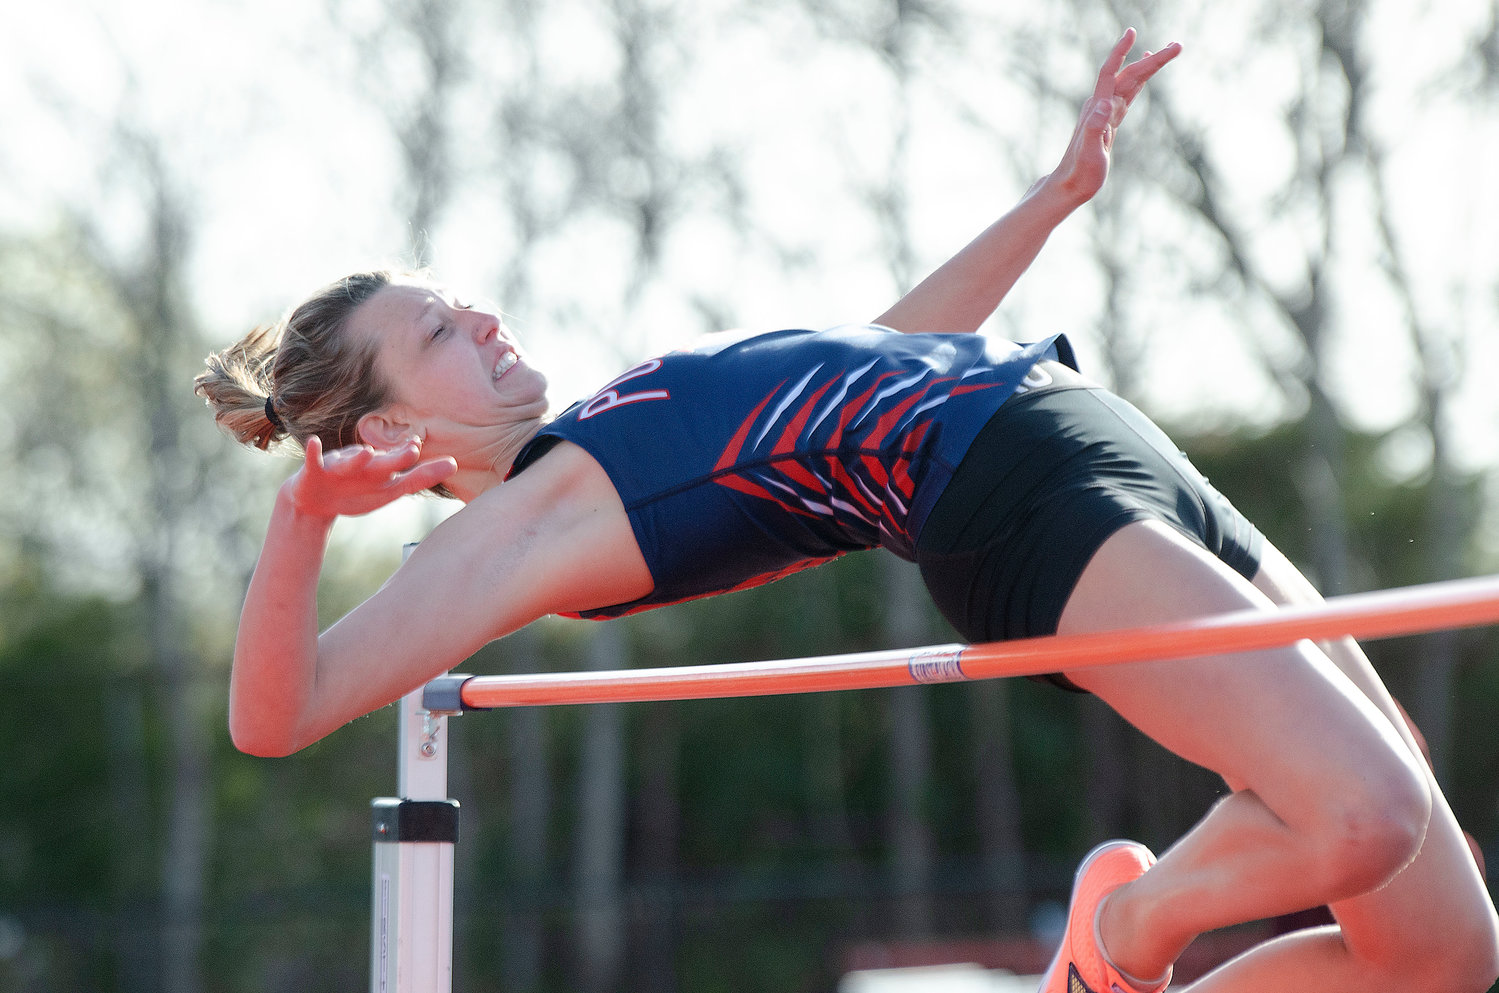 The Patriots’ Morgan Casey eases over the bar during the girls’ high jump, which she won with a best effort of 5 feet, 2 inches.